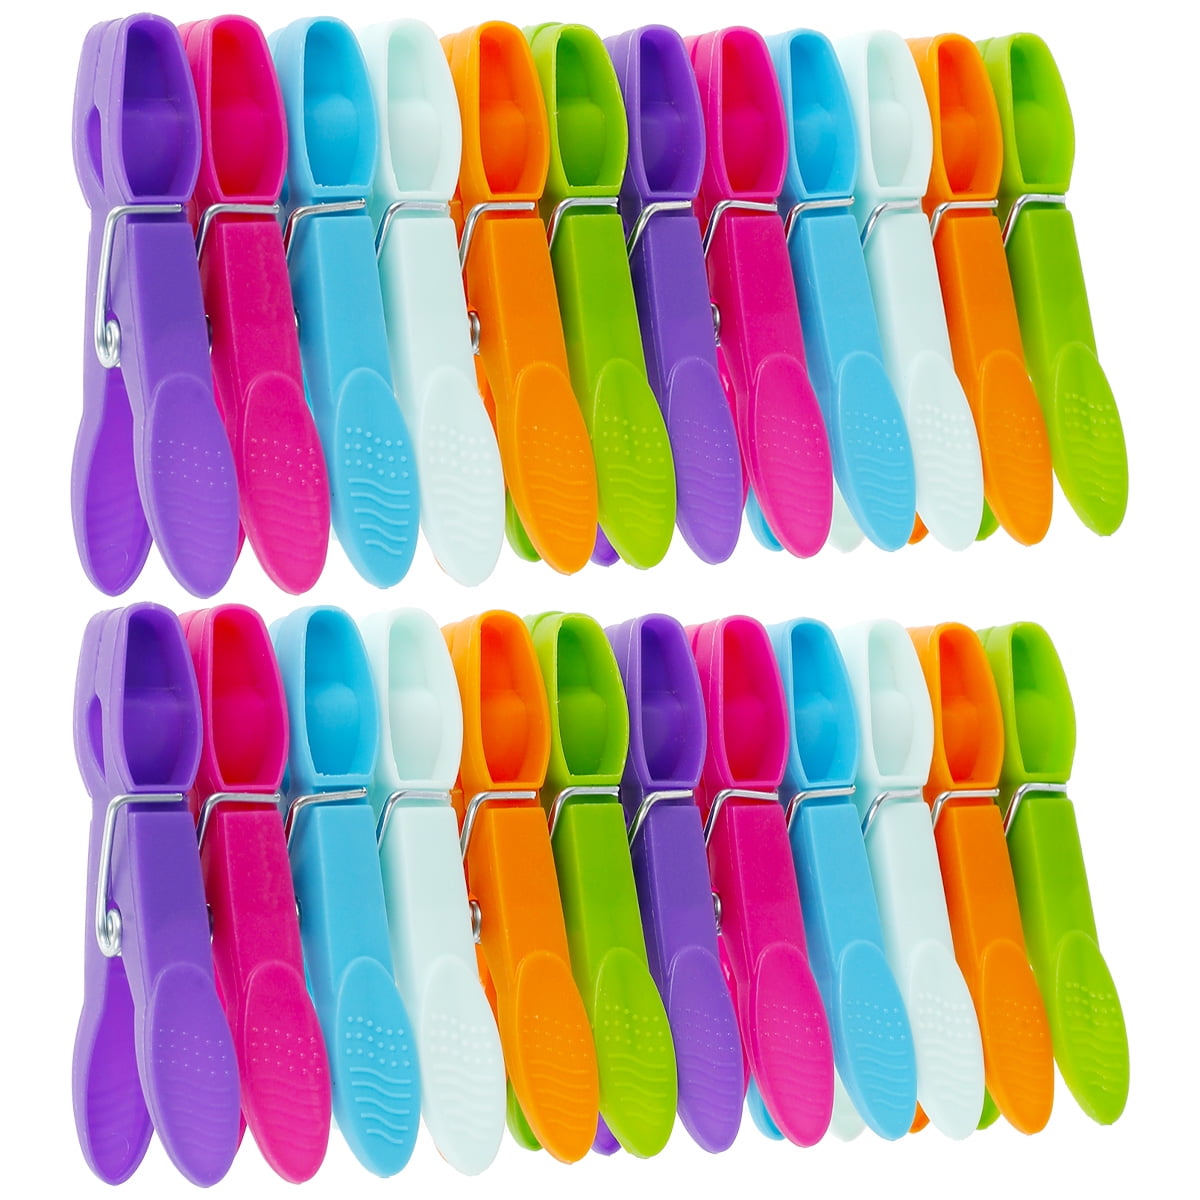 24pcs Super Grip Extra Strong Plastic Clothes Laundry Washing Line Pegs Clips 